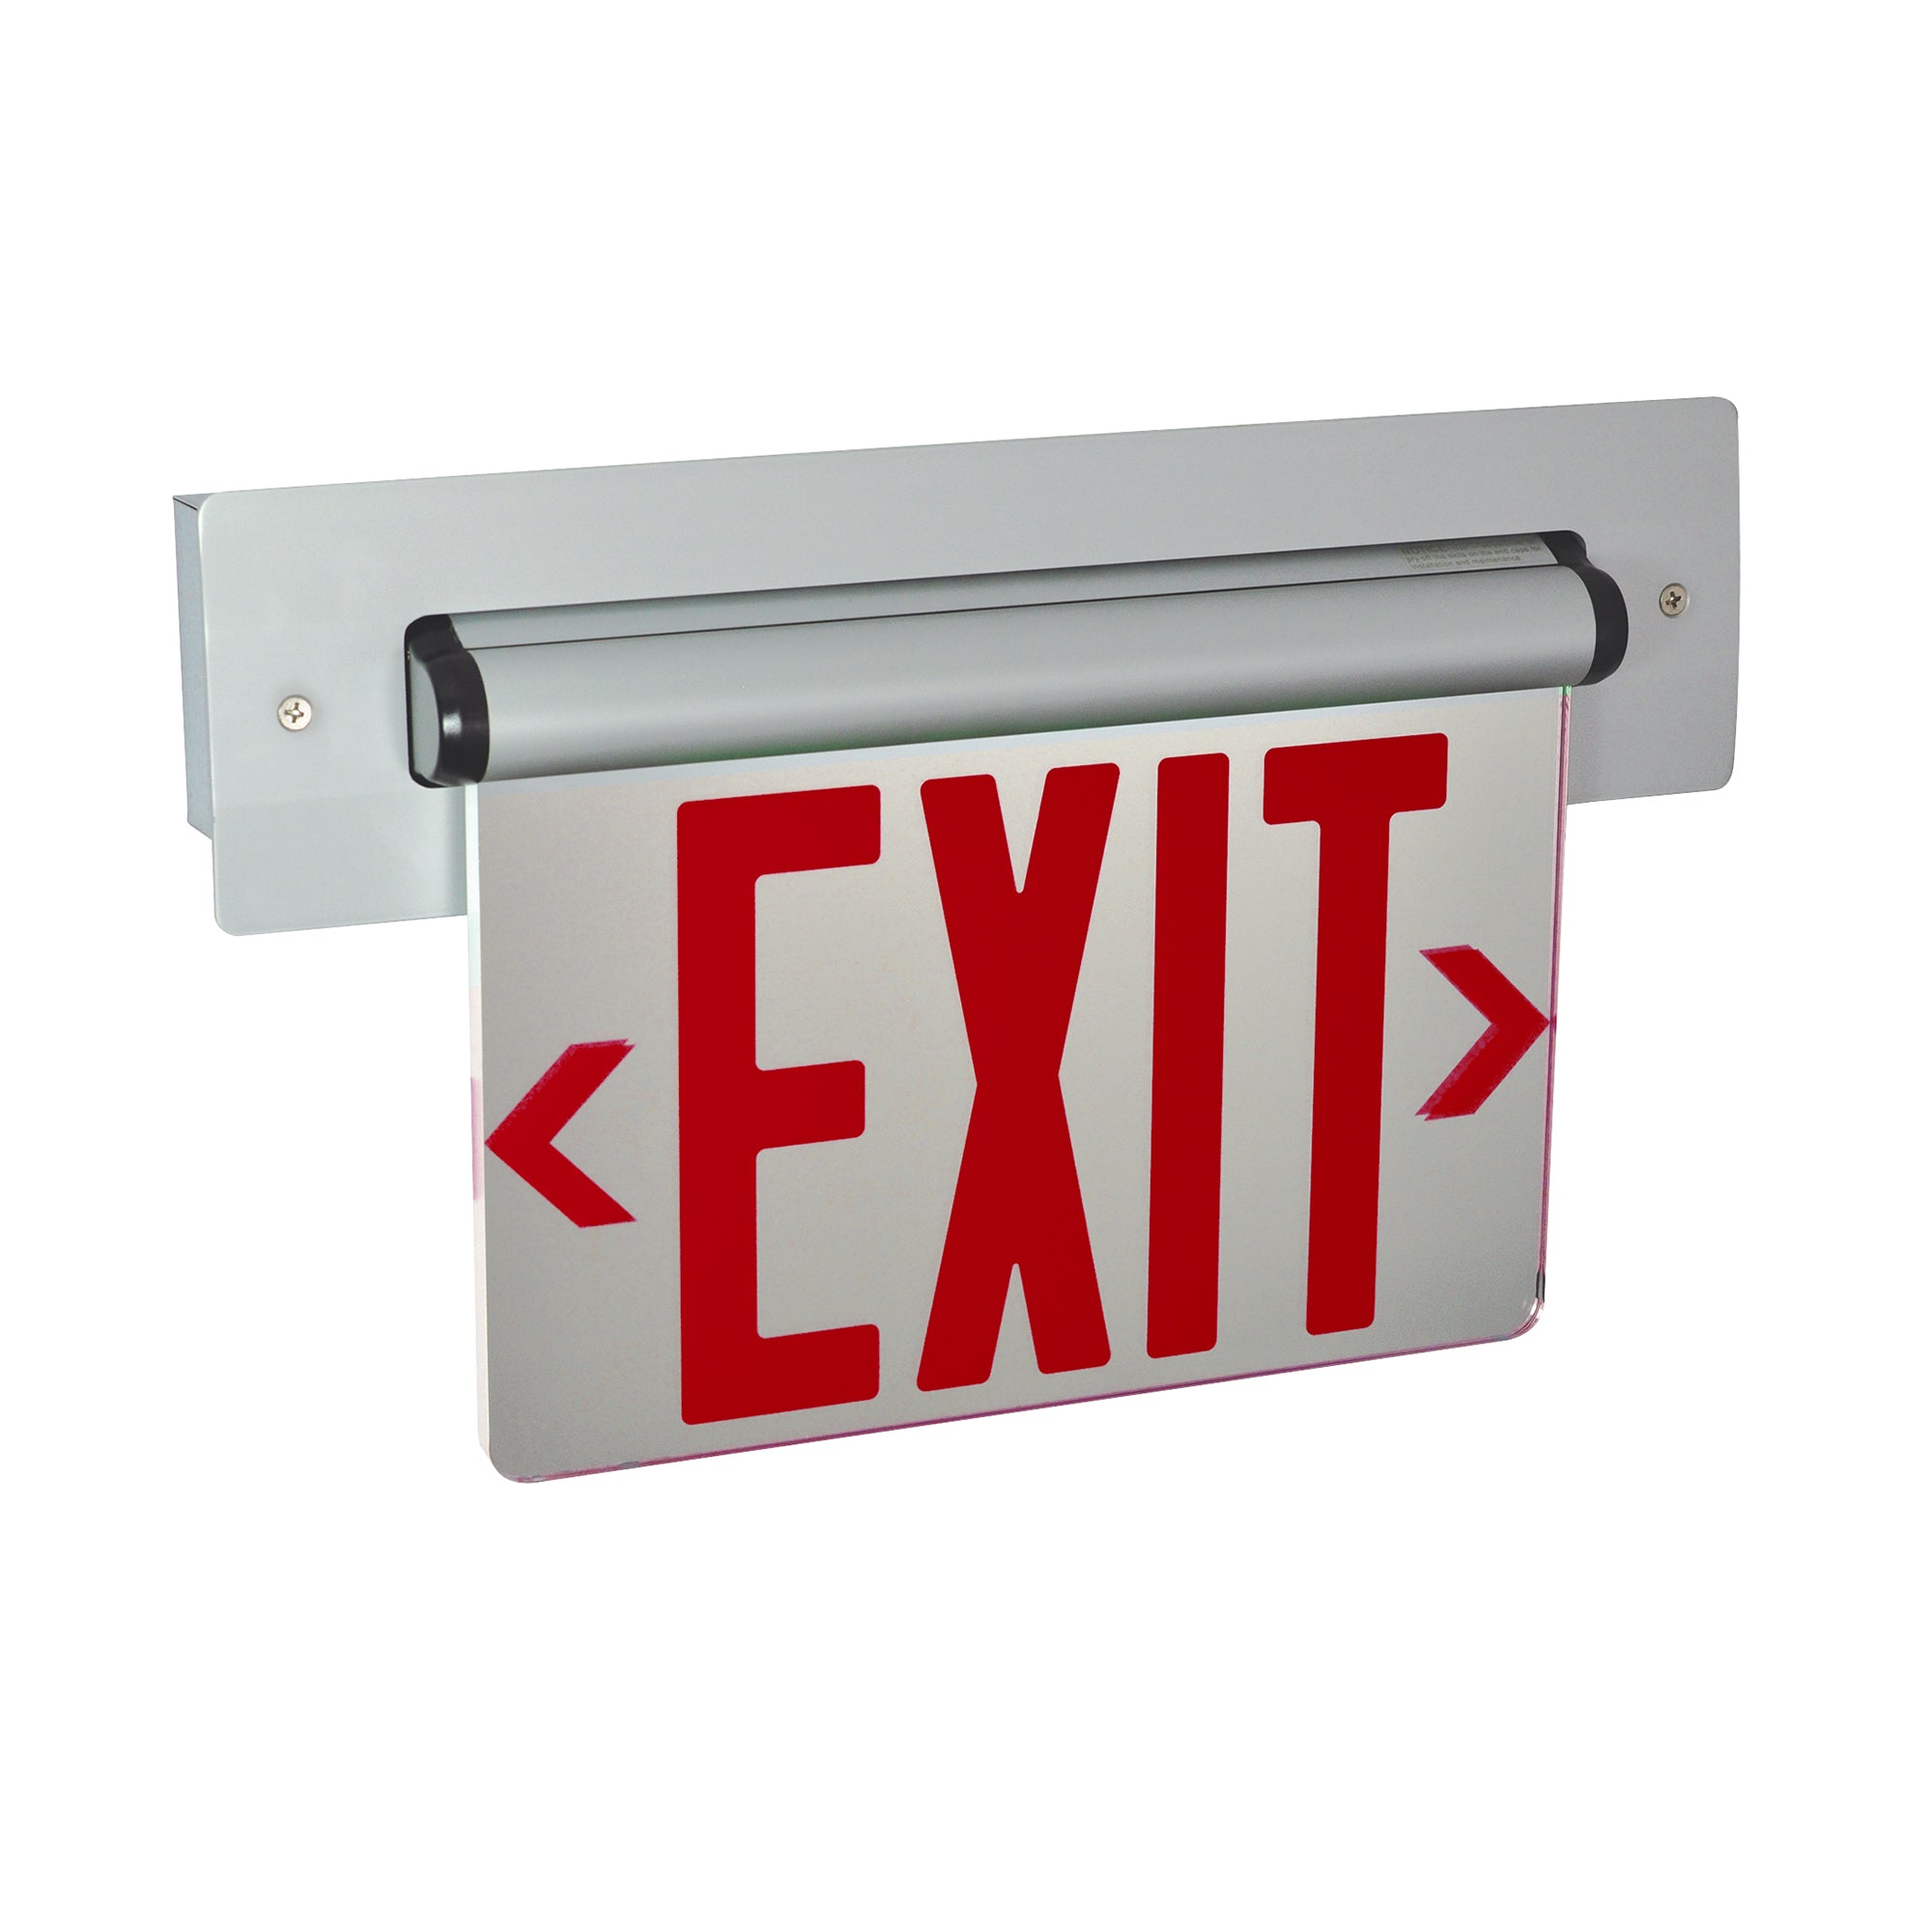 Nora Lighting NX-815-LEDRMA - Exit / Emergency - Recessed Adjustable LED Edge-Lit Exit Sign, Battery Backup, 6 Inch Red Letters, Single Face / Mirrored Acrylic, Aluminum Housing